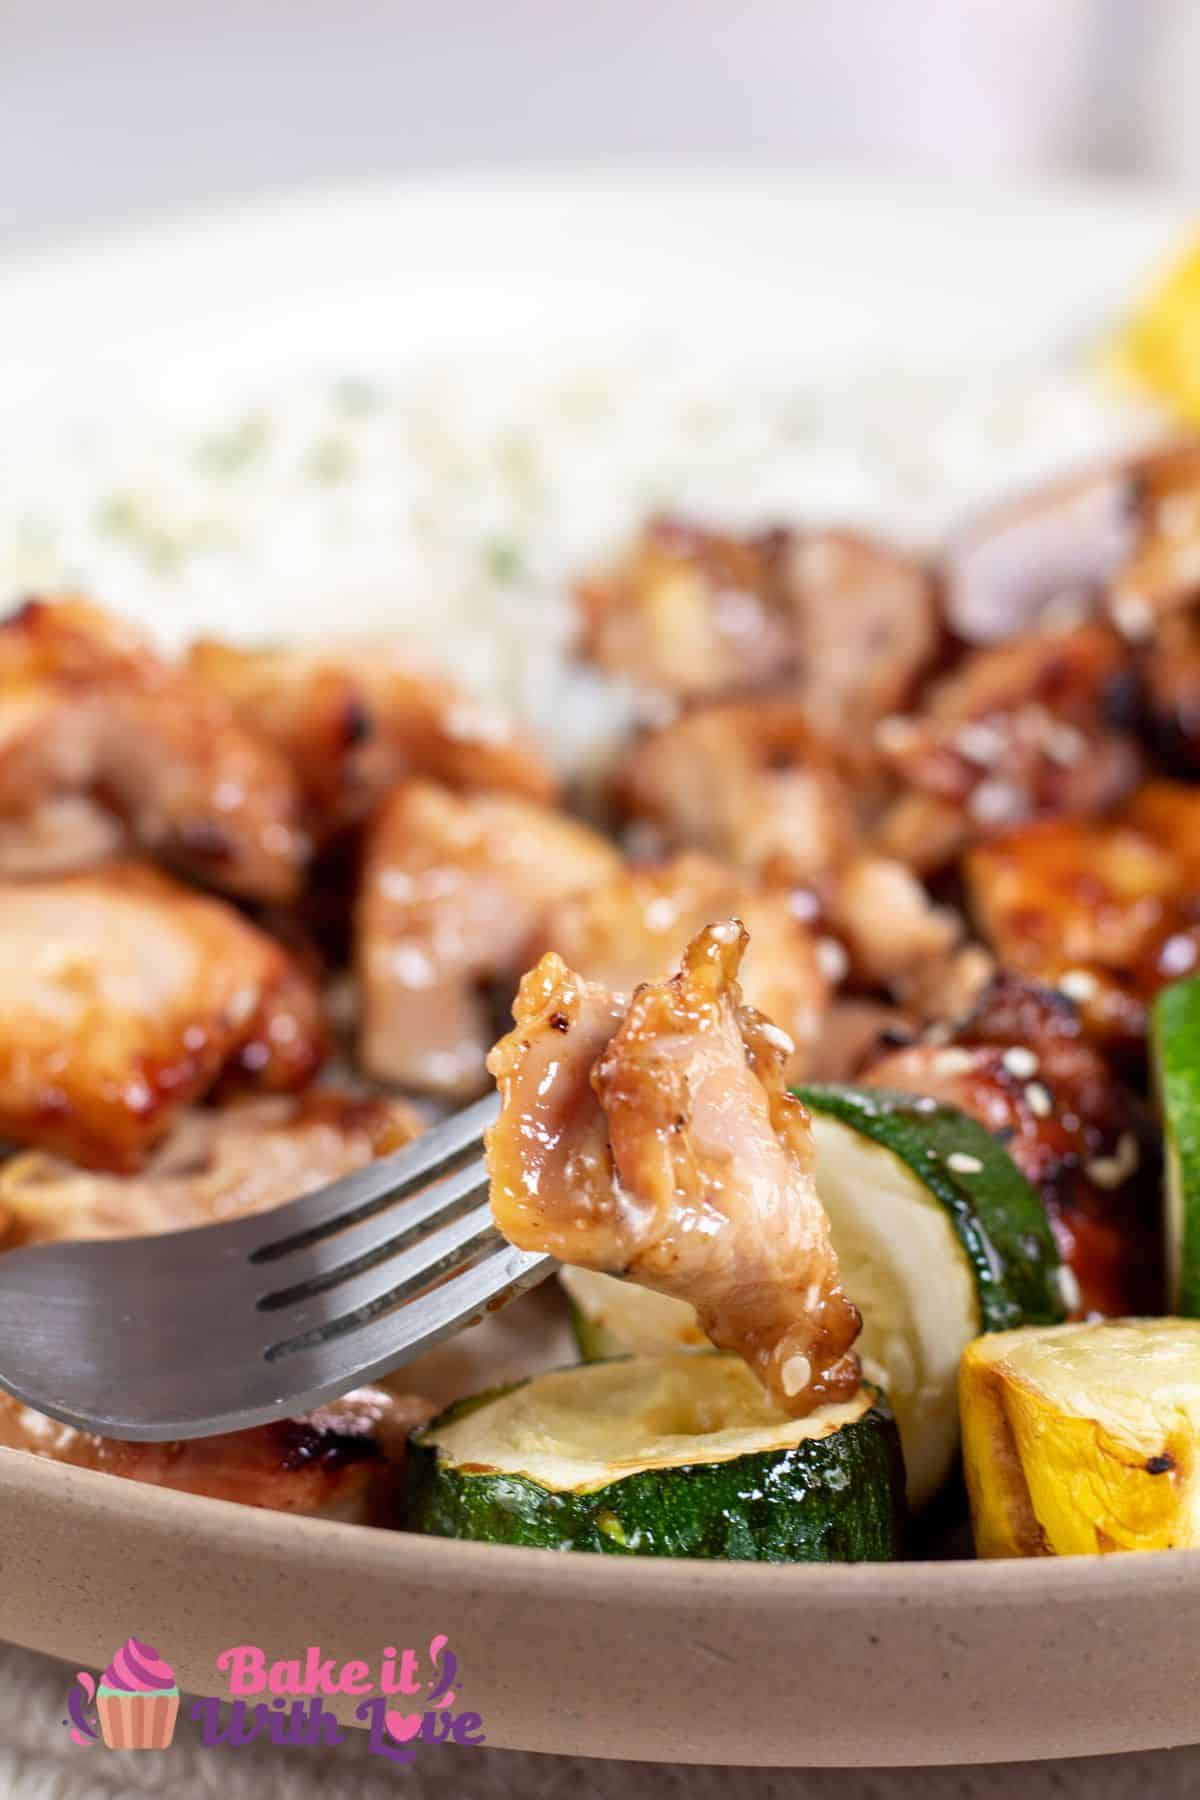 Tall image showing chicken teriyaki skewers on a plate with white rice.